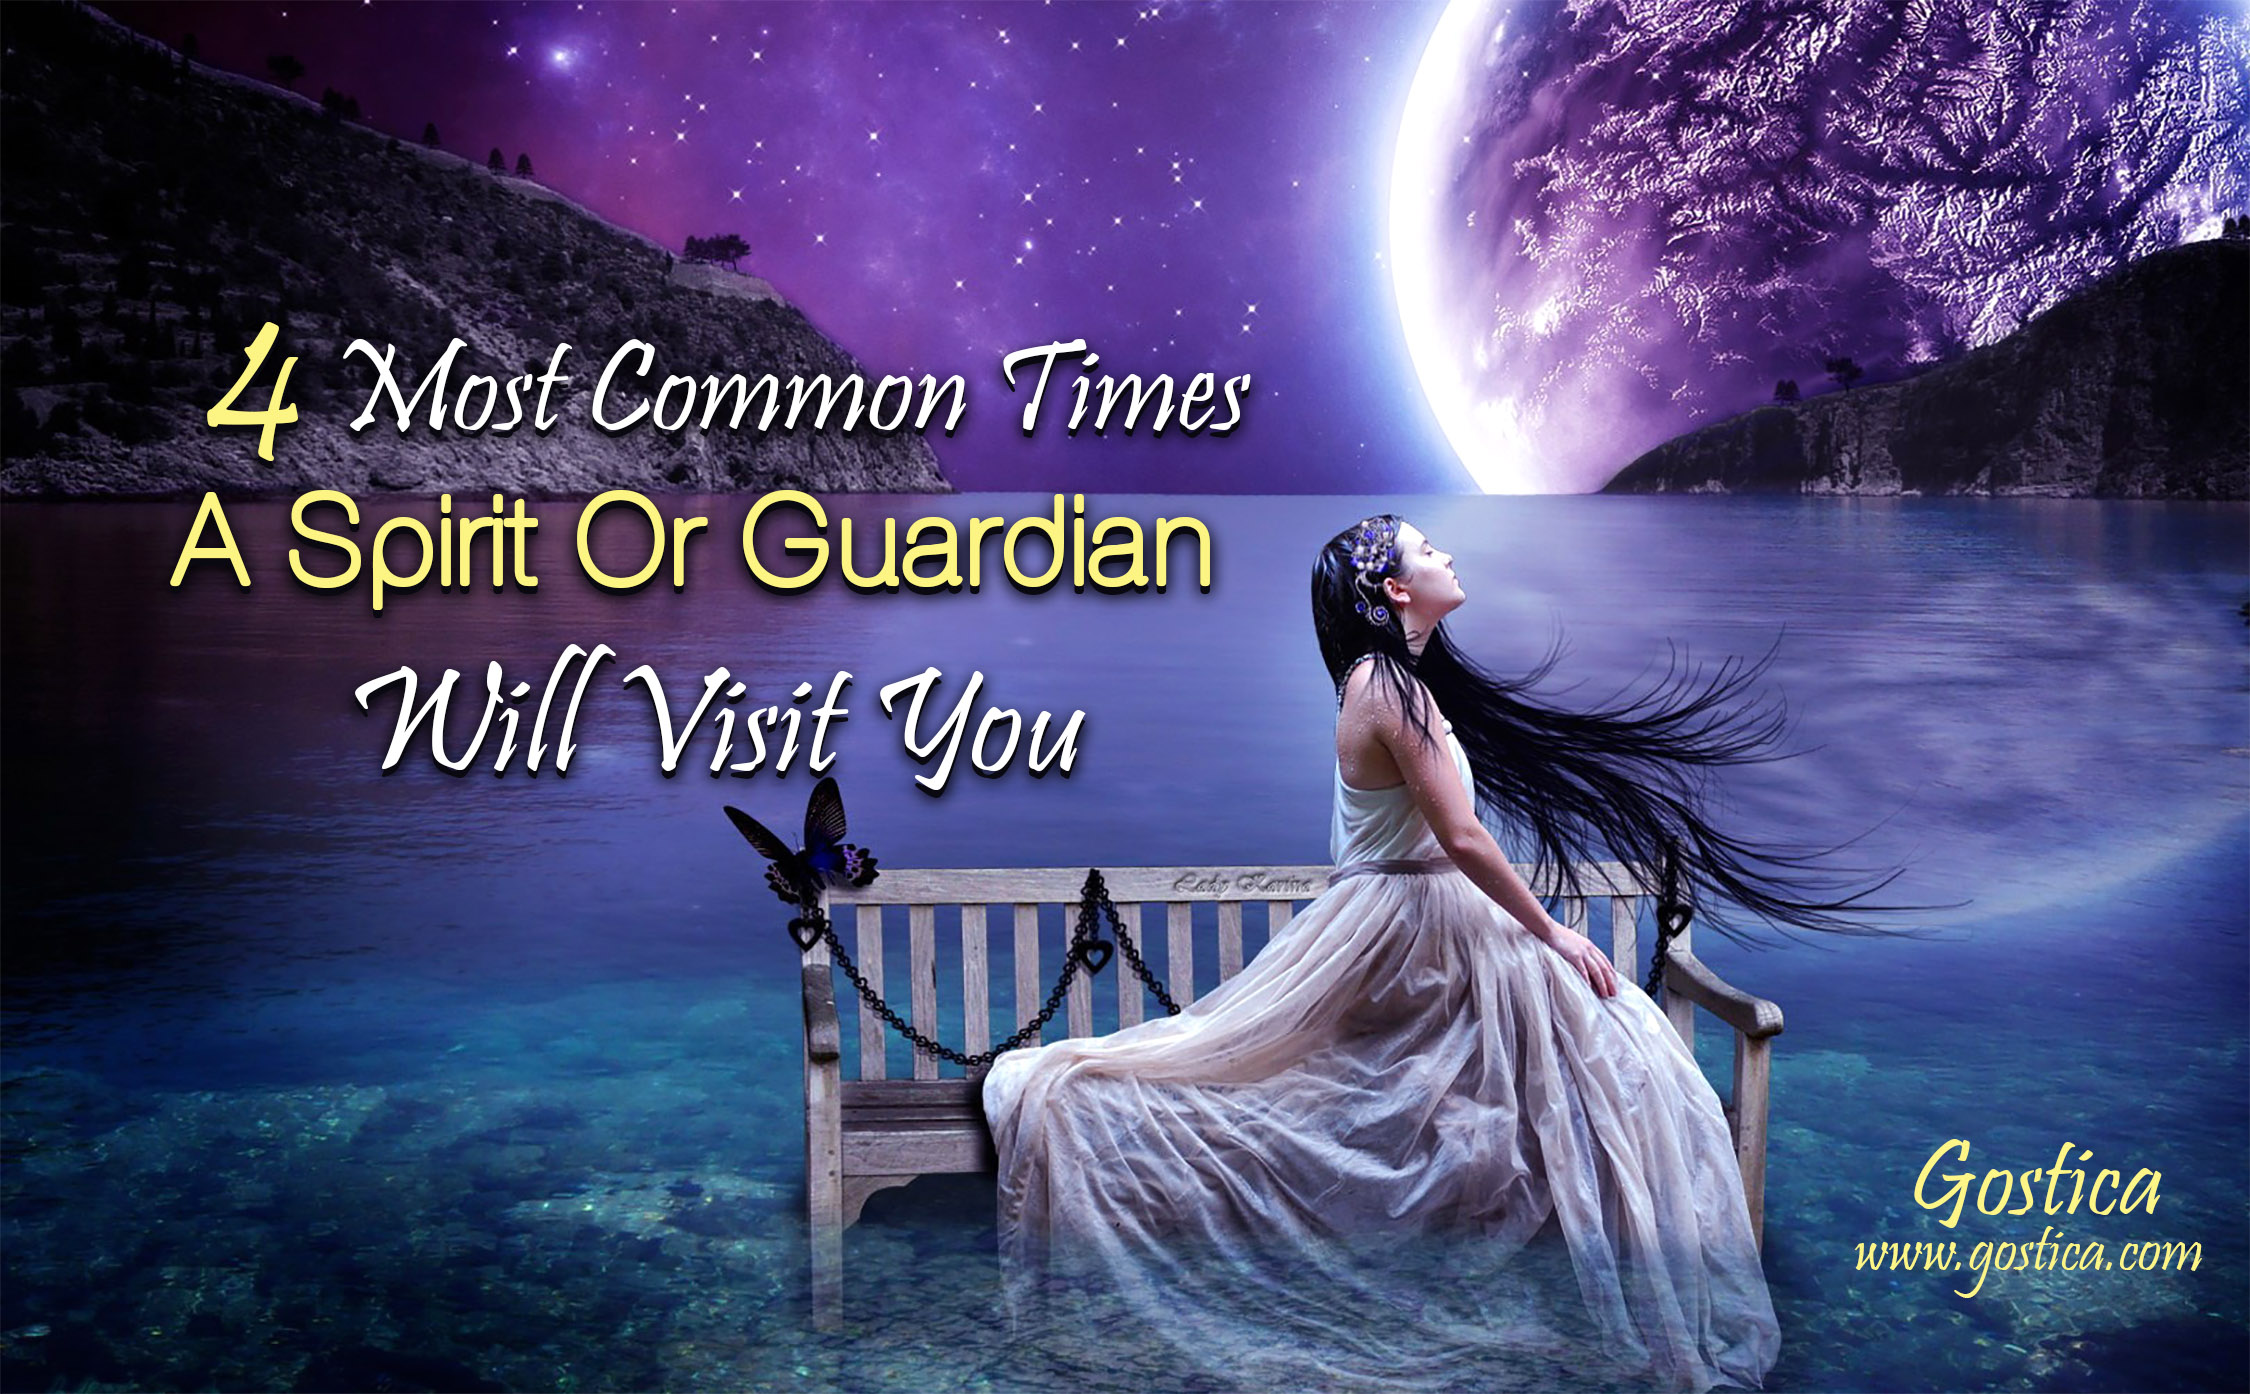 The-4-Most-Common-Times-A-Spirit-Or-Guardian-Will-Visit-You.jpg